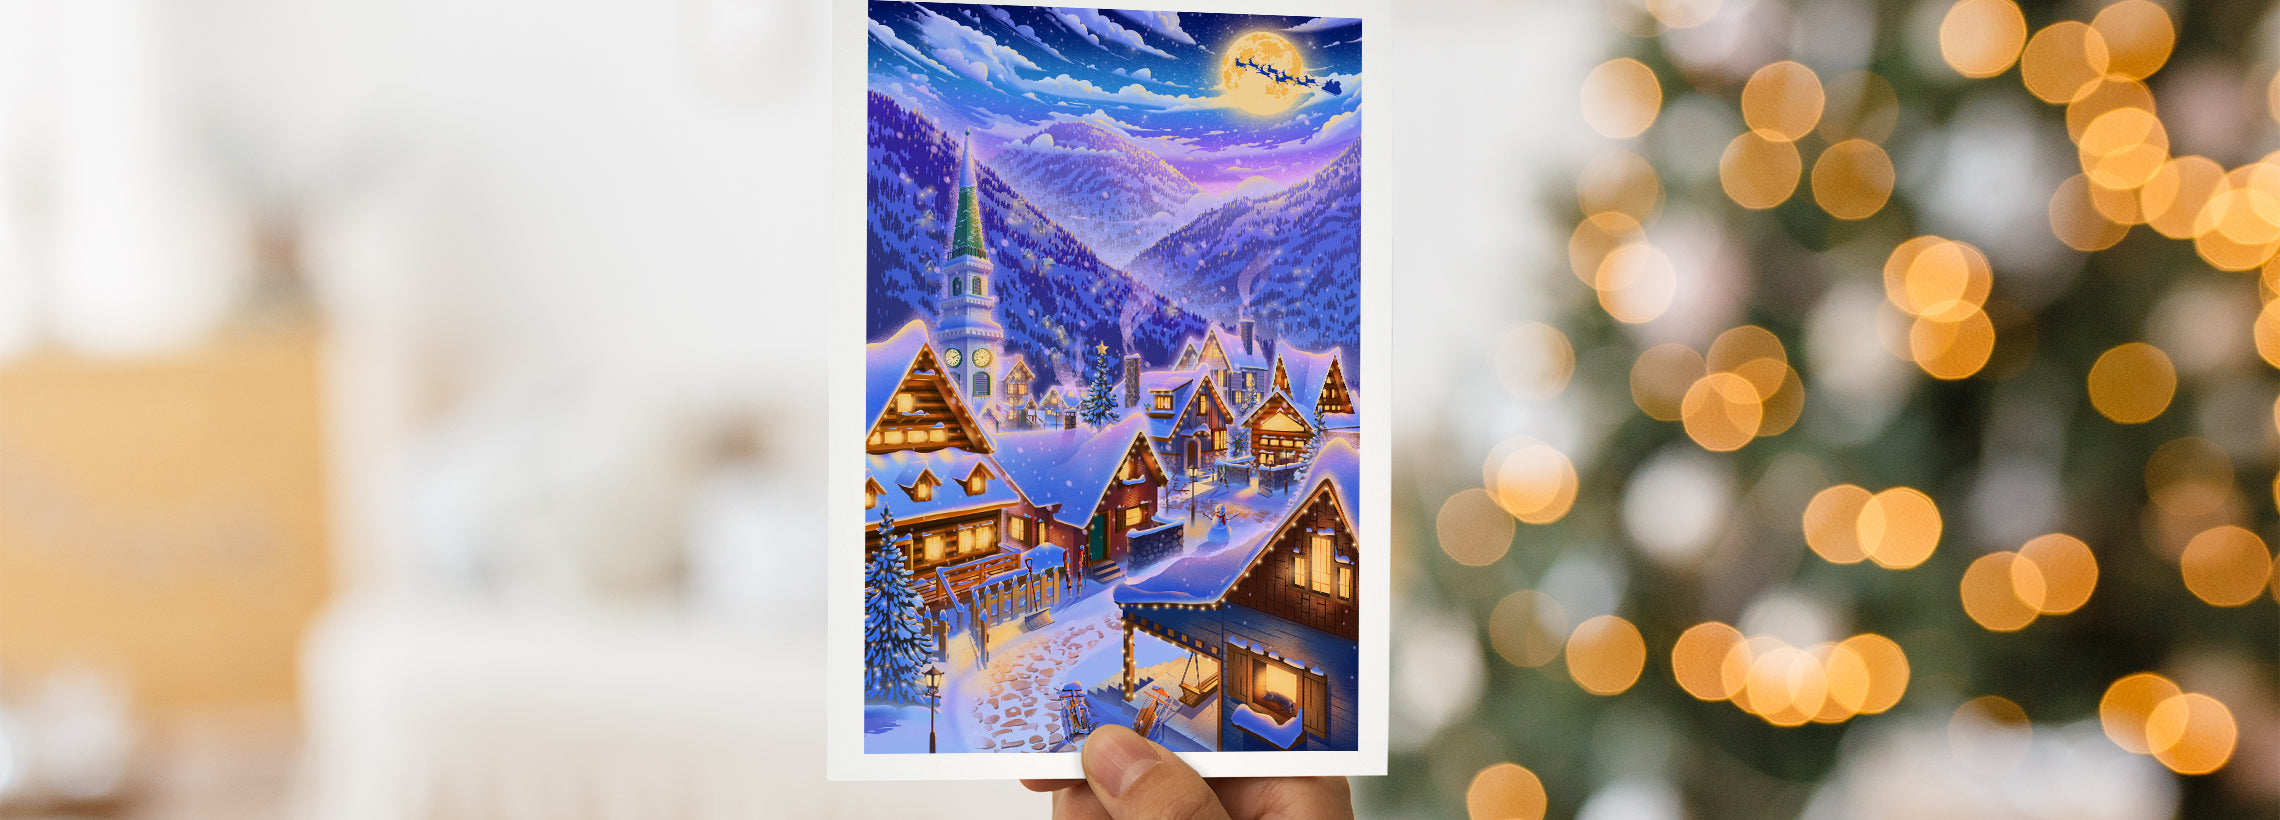 A hand holds a greeting card in front of an out-of-focus lit tree. The card is predominantly blue,  and features a small town in the snow at night, with warm incandescent light spilling from the windows. In the far distance are mountains, with Santa and reindeer crossing a full moon.